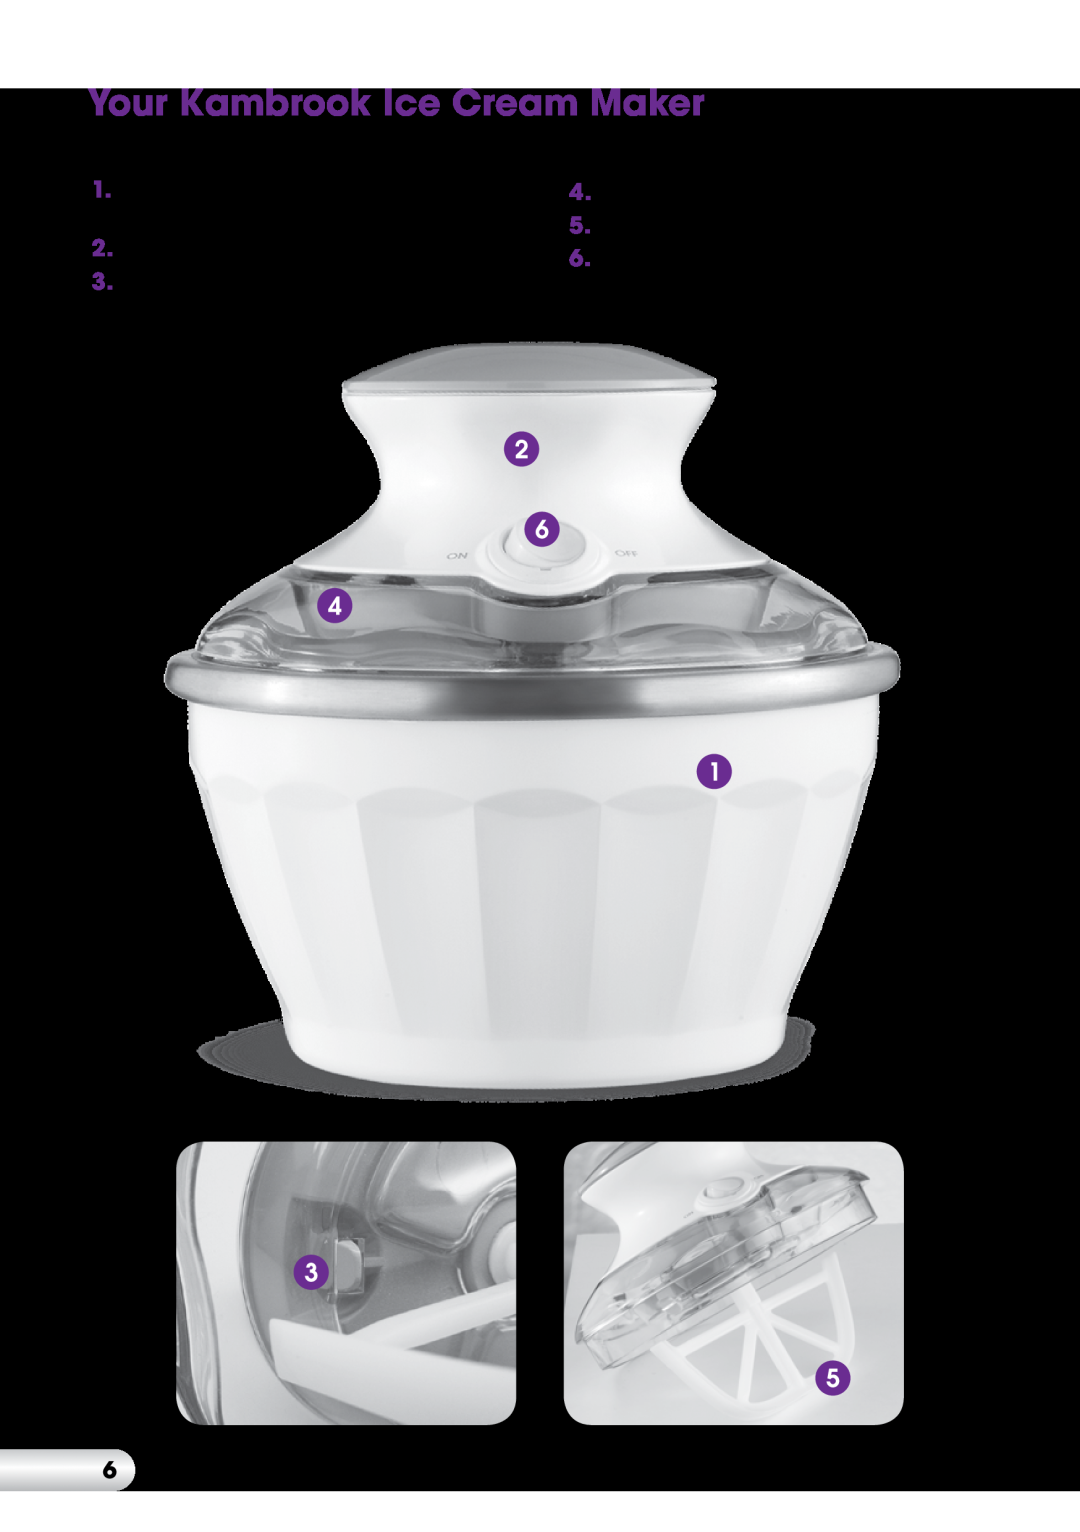 Kambrook KLC3FM manual Your Kambrook Ice Cream Maker, Insulated Ice Cream Bowl 2 bowls for KLCIA4 only 2. Motor Unit 